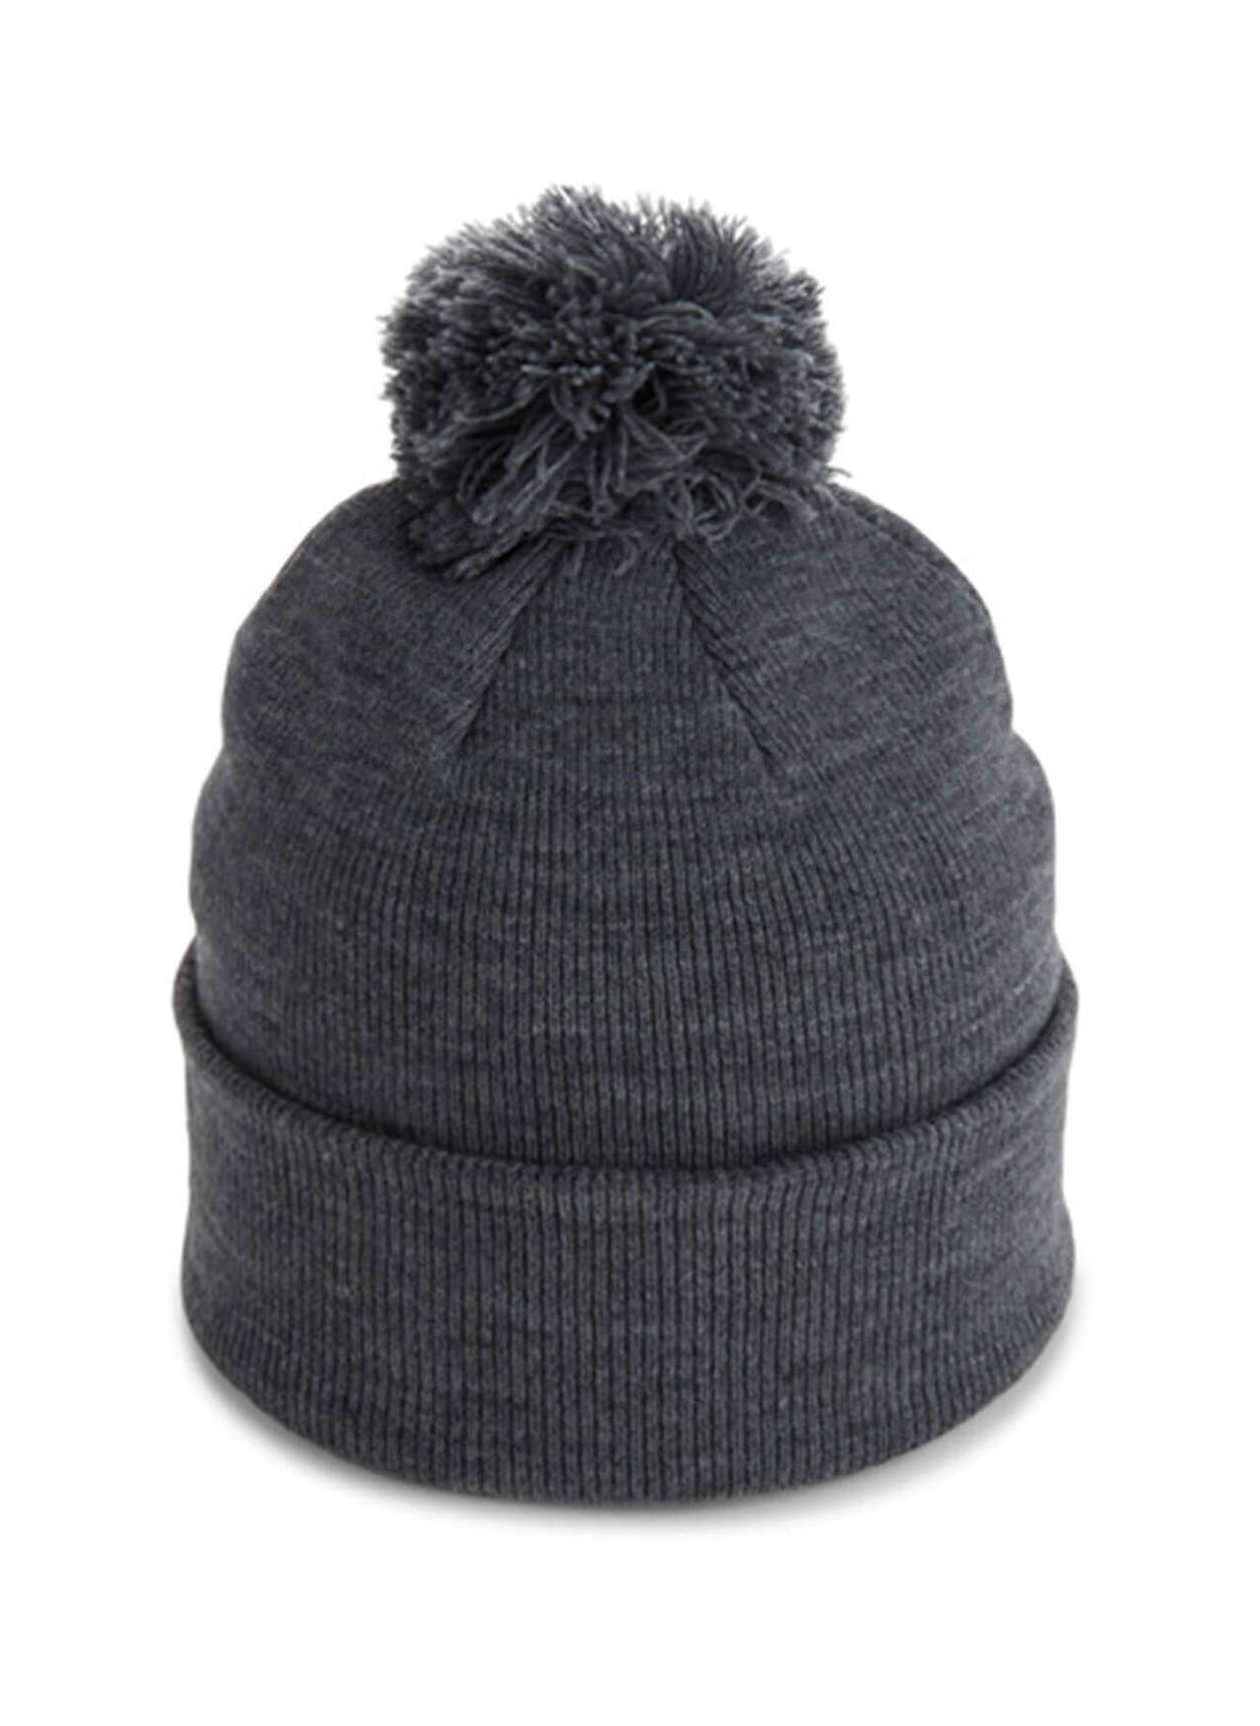 Imperial Heather Charcoal The Tahoe Knit Beanie with Pom